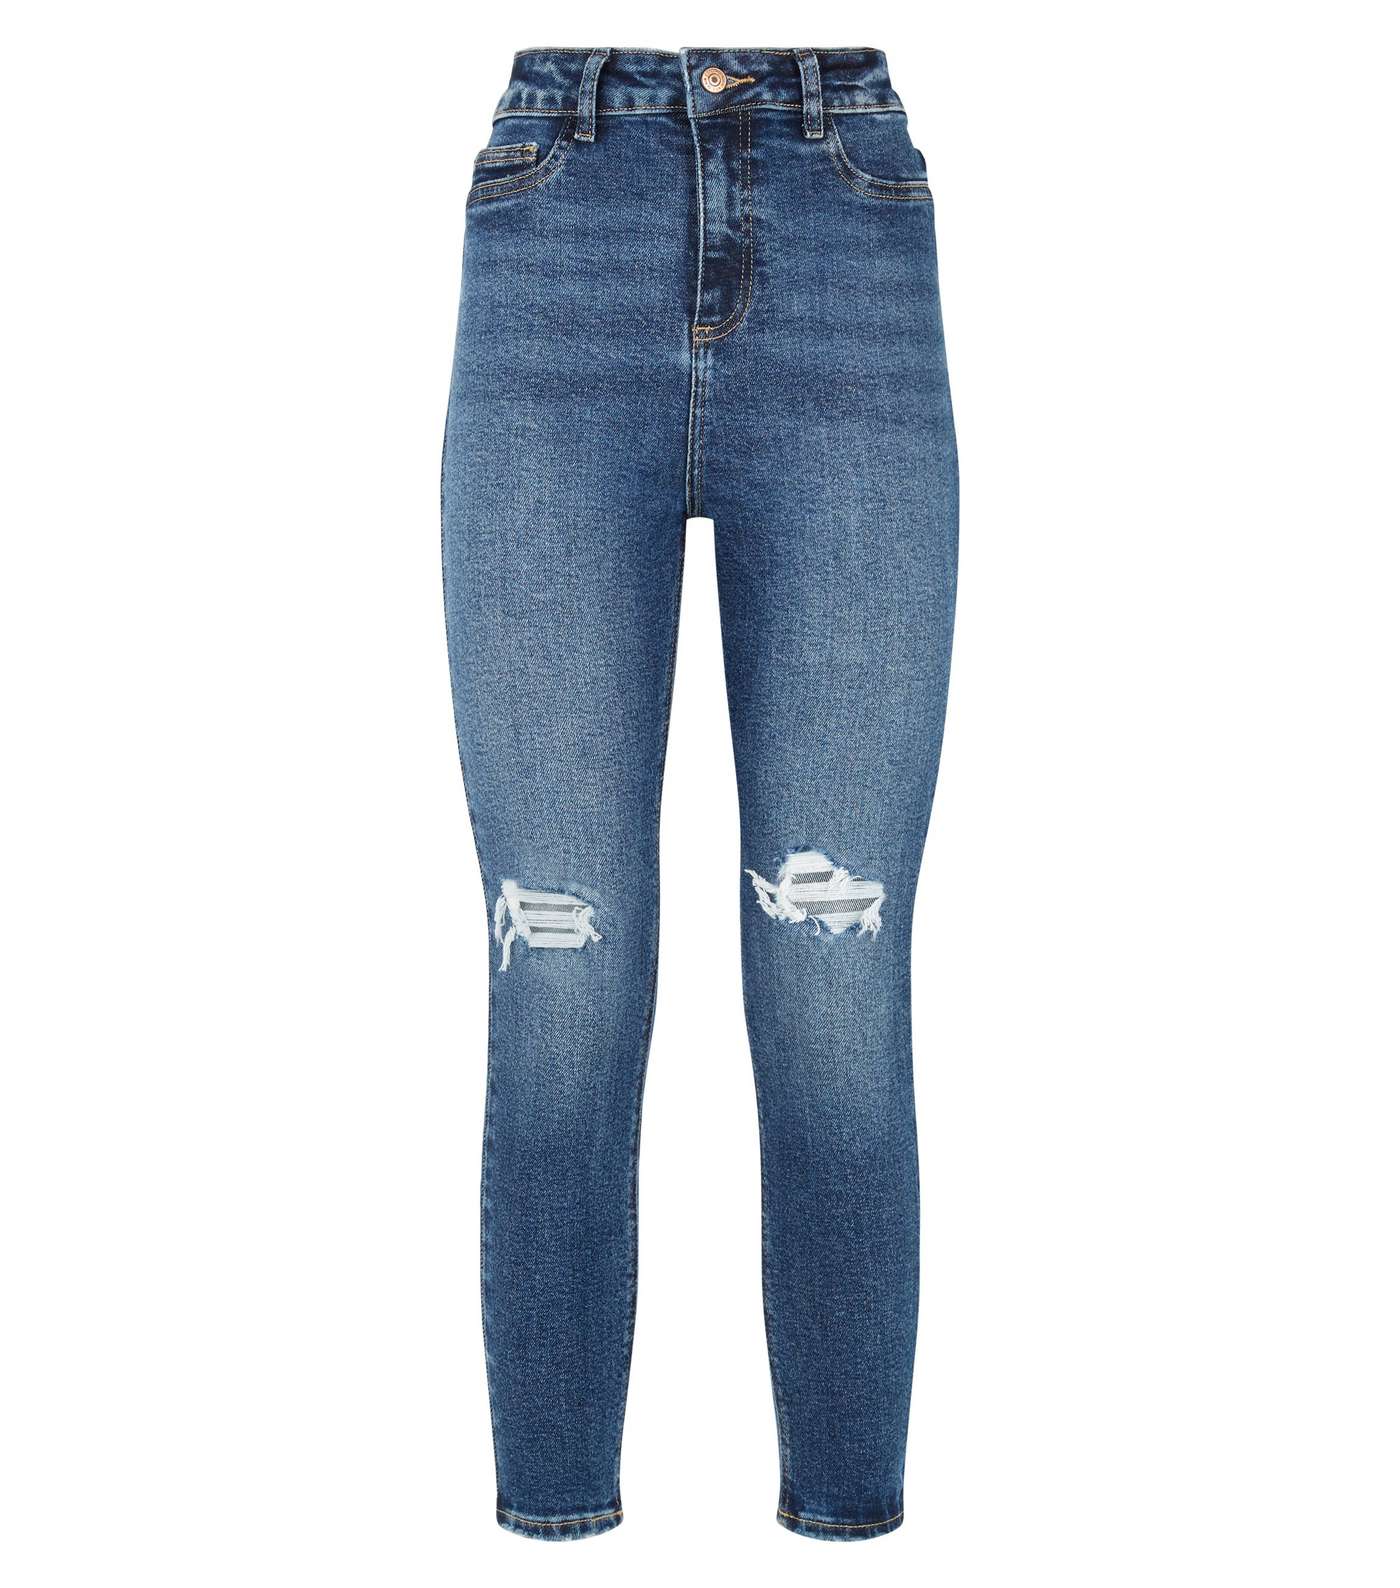 Petite Blue Rinse Wash Ripped High Waist Super Skinny Jeans Image 4